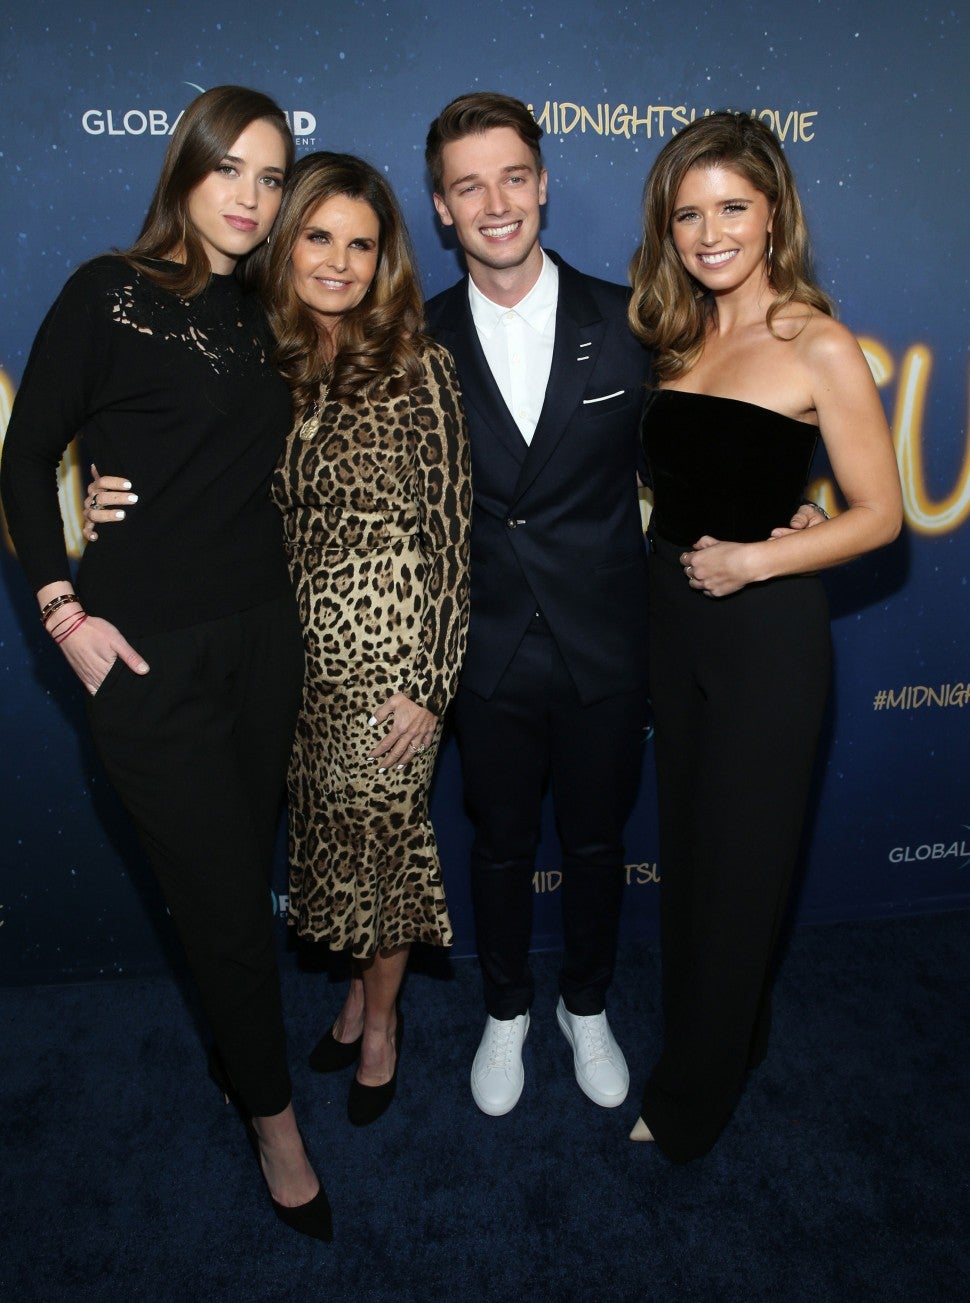 Patrick Schwarzenegger, his mom and sisters at the 'Midnight Sun' premiere in Hollywood